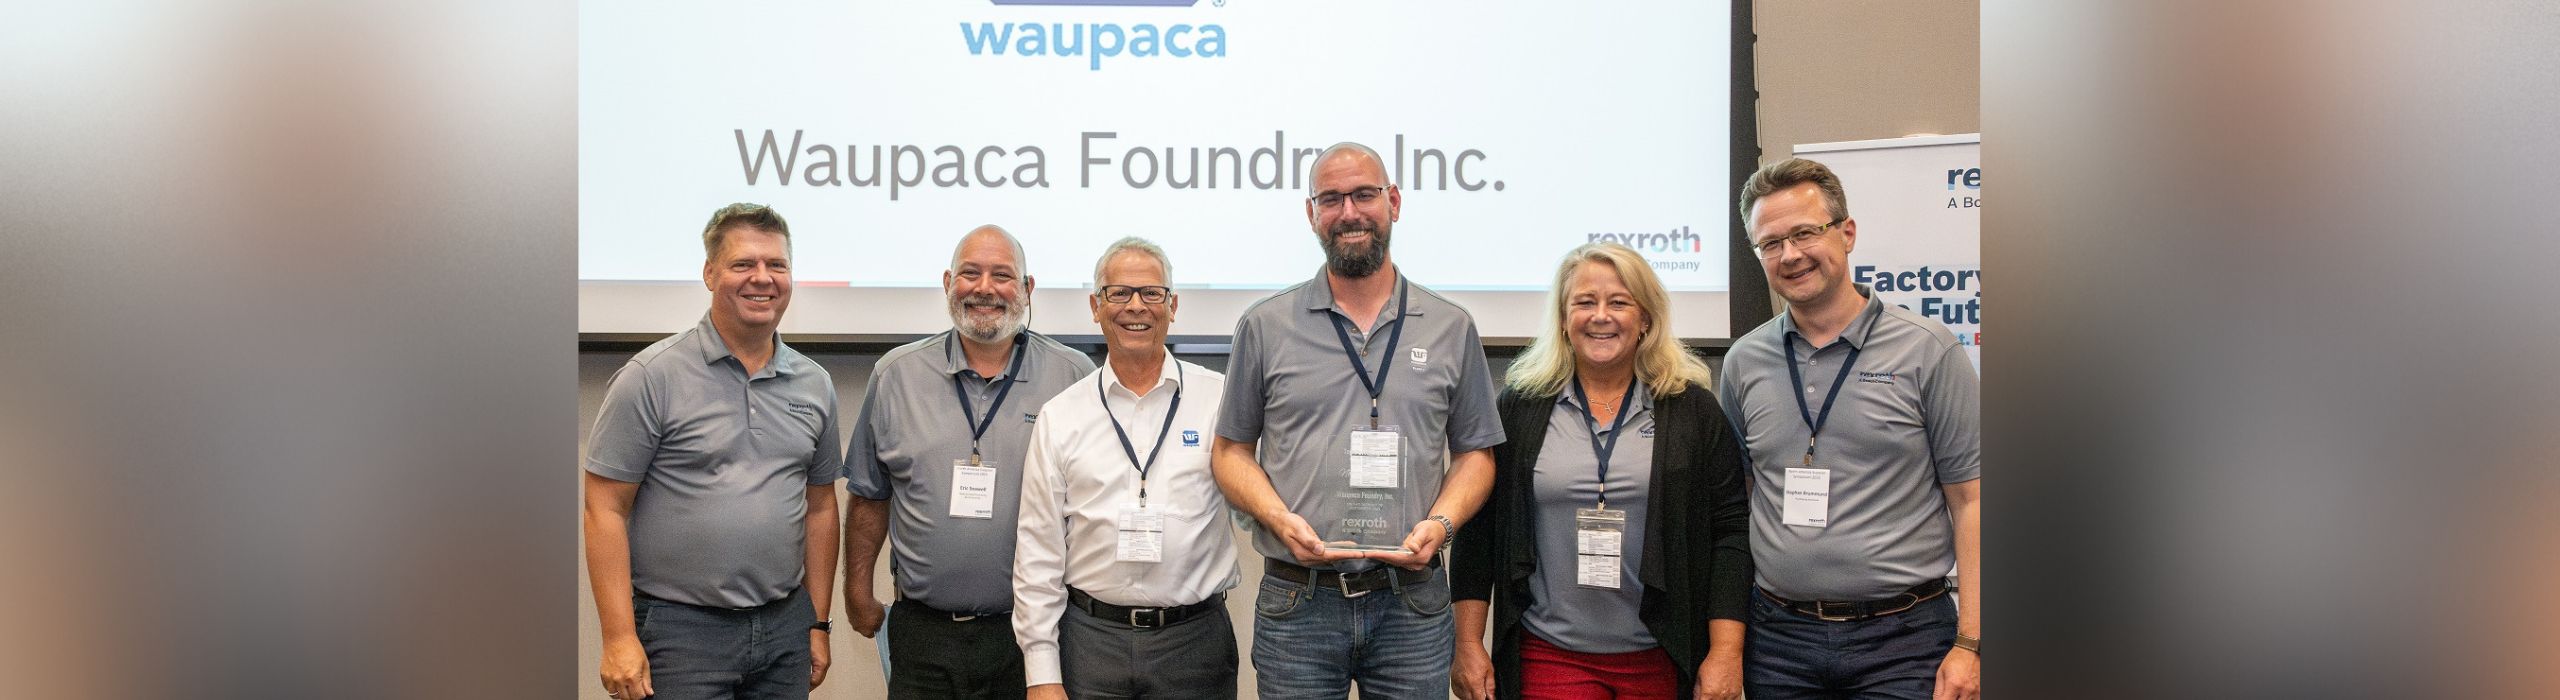 Waupaca Foundry Outperforms Global Suppliers